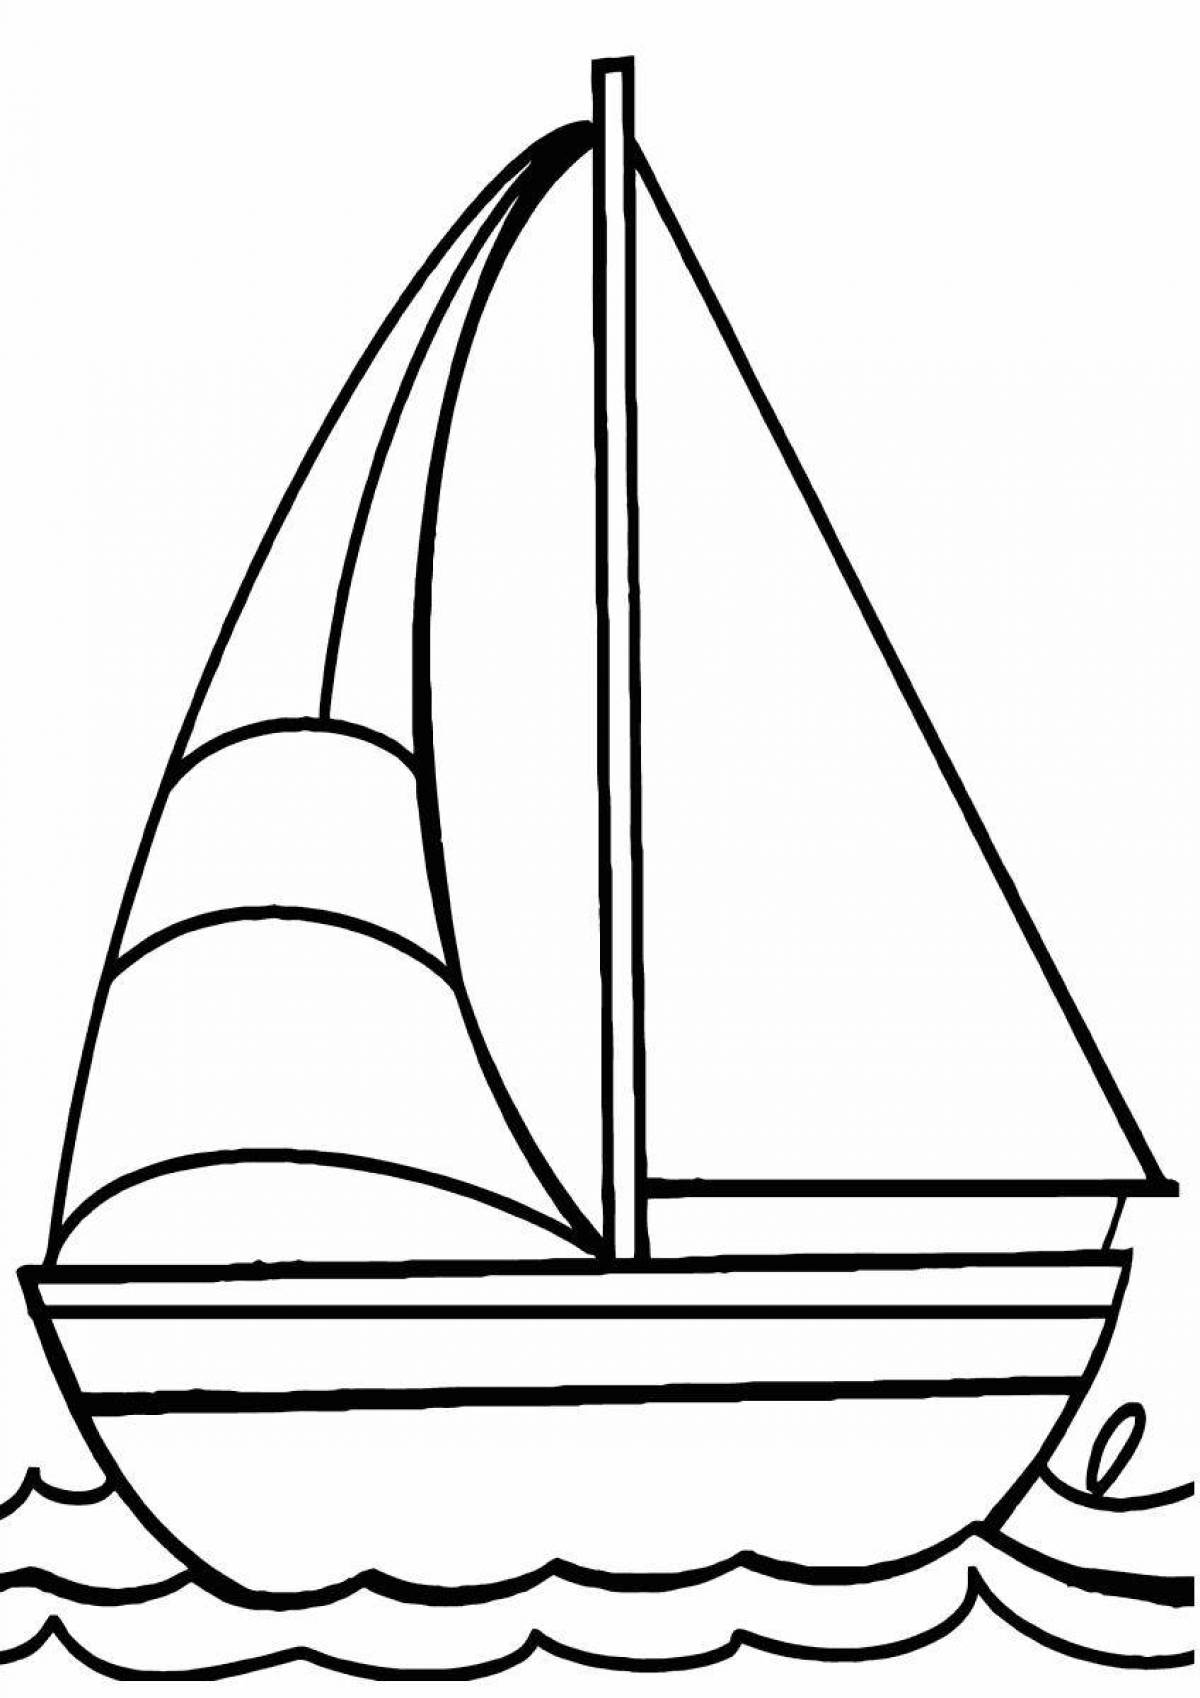 Luminous boat coloring page for kids